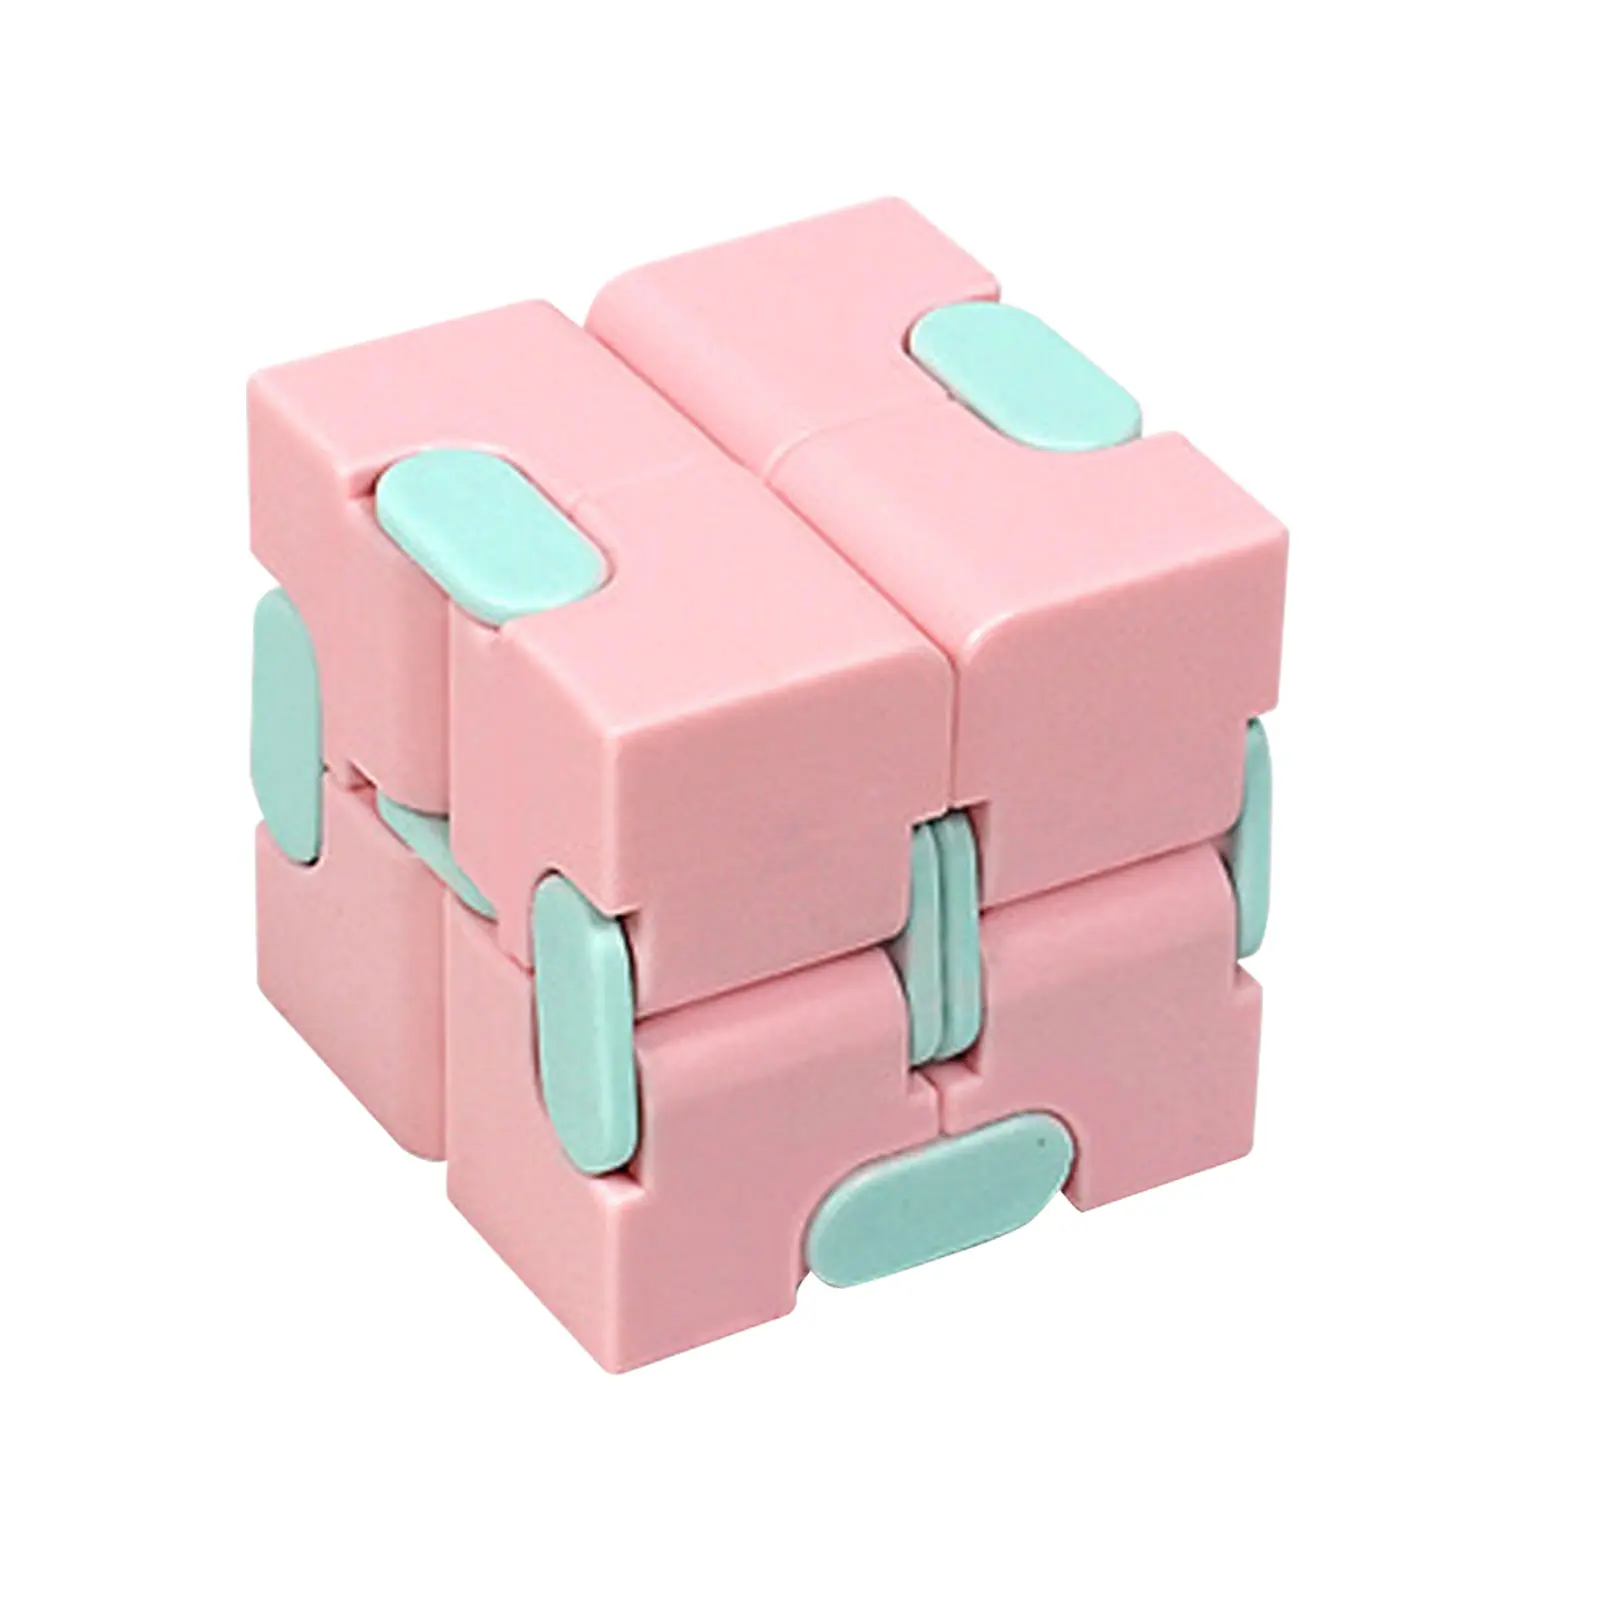 Puzzle Cube Durable Exquisite Decompression Toy Infinity Magic Cube For Adults Kids Fidget Case Antistress Anxiety Desk Toy 8